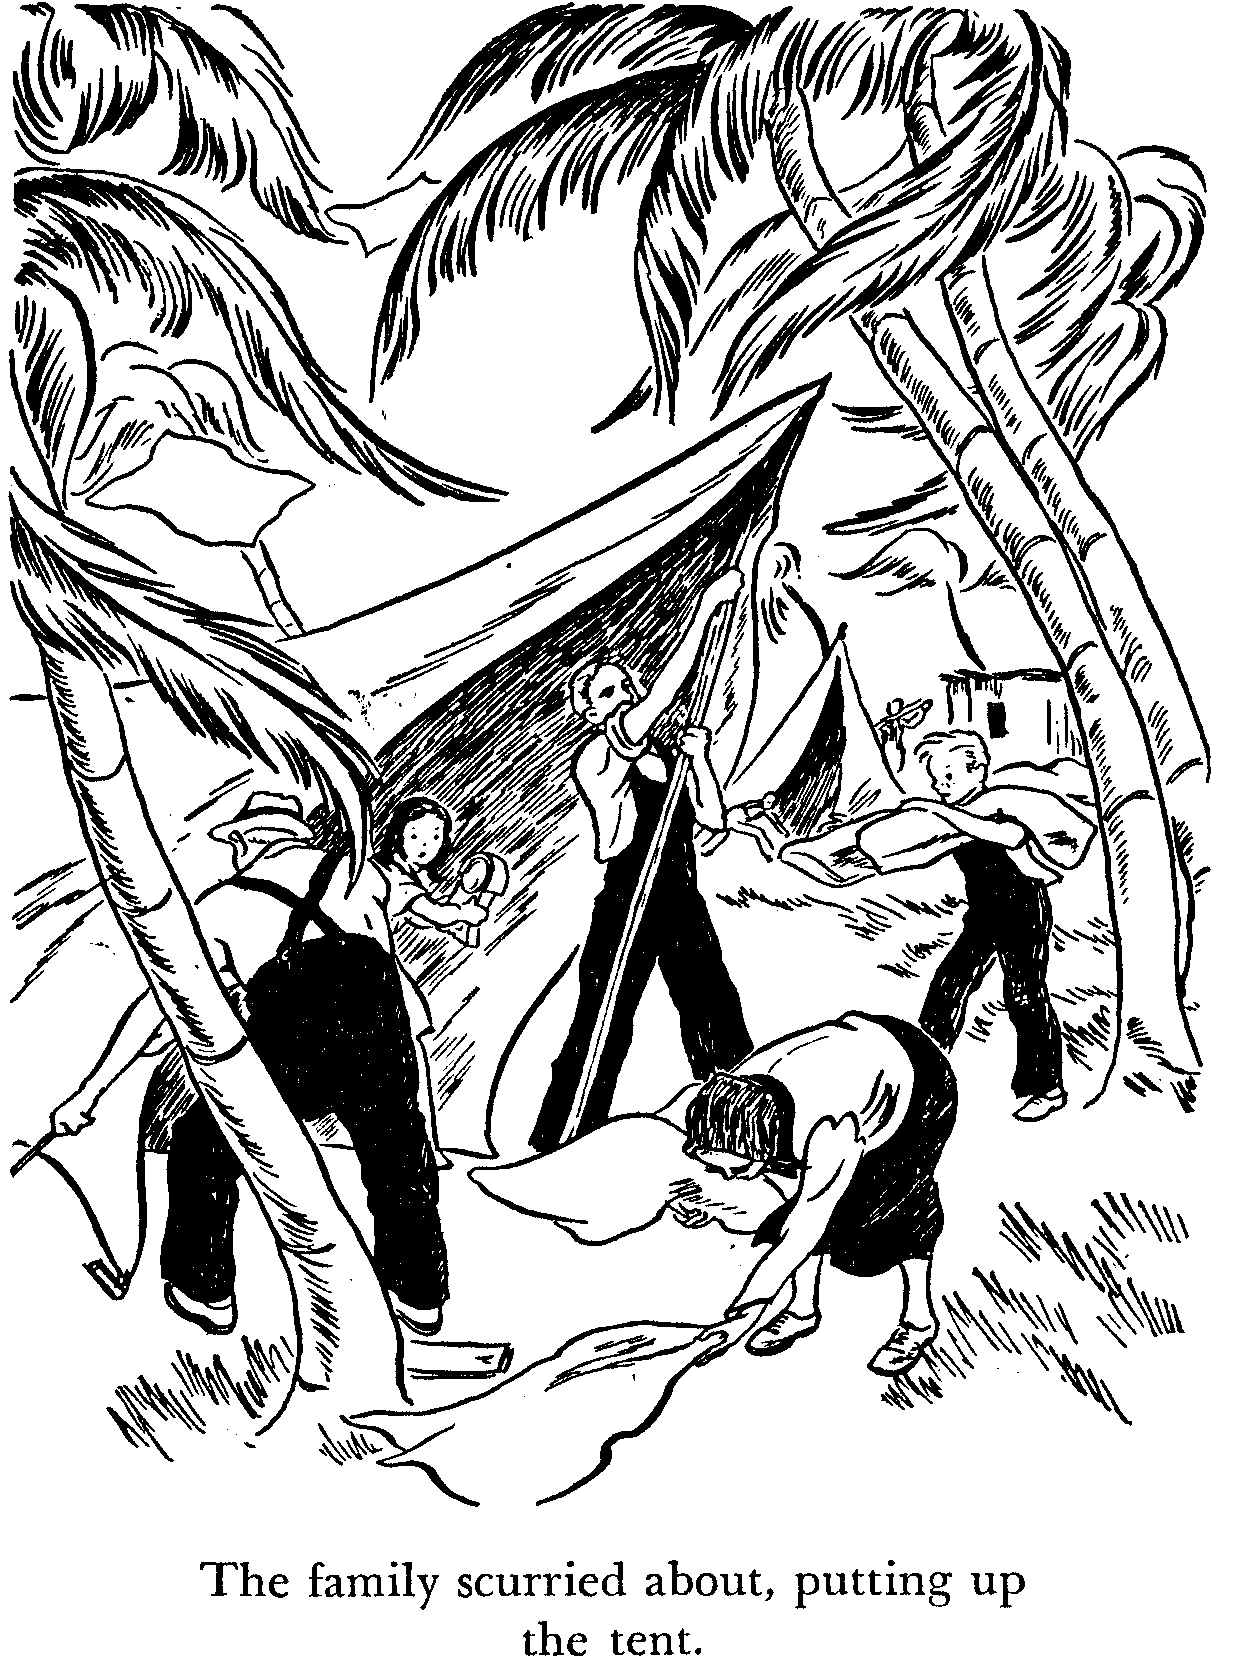 Illustration: Putting up the tent